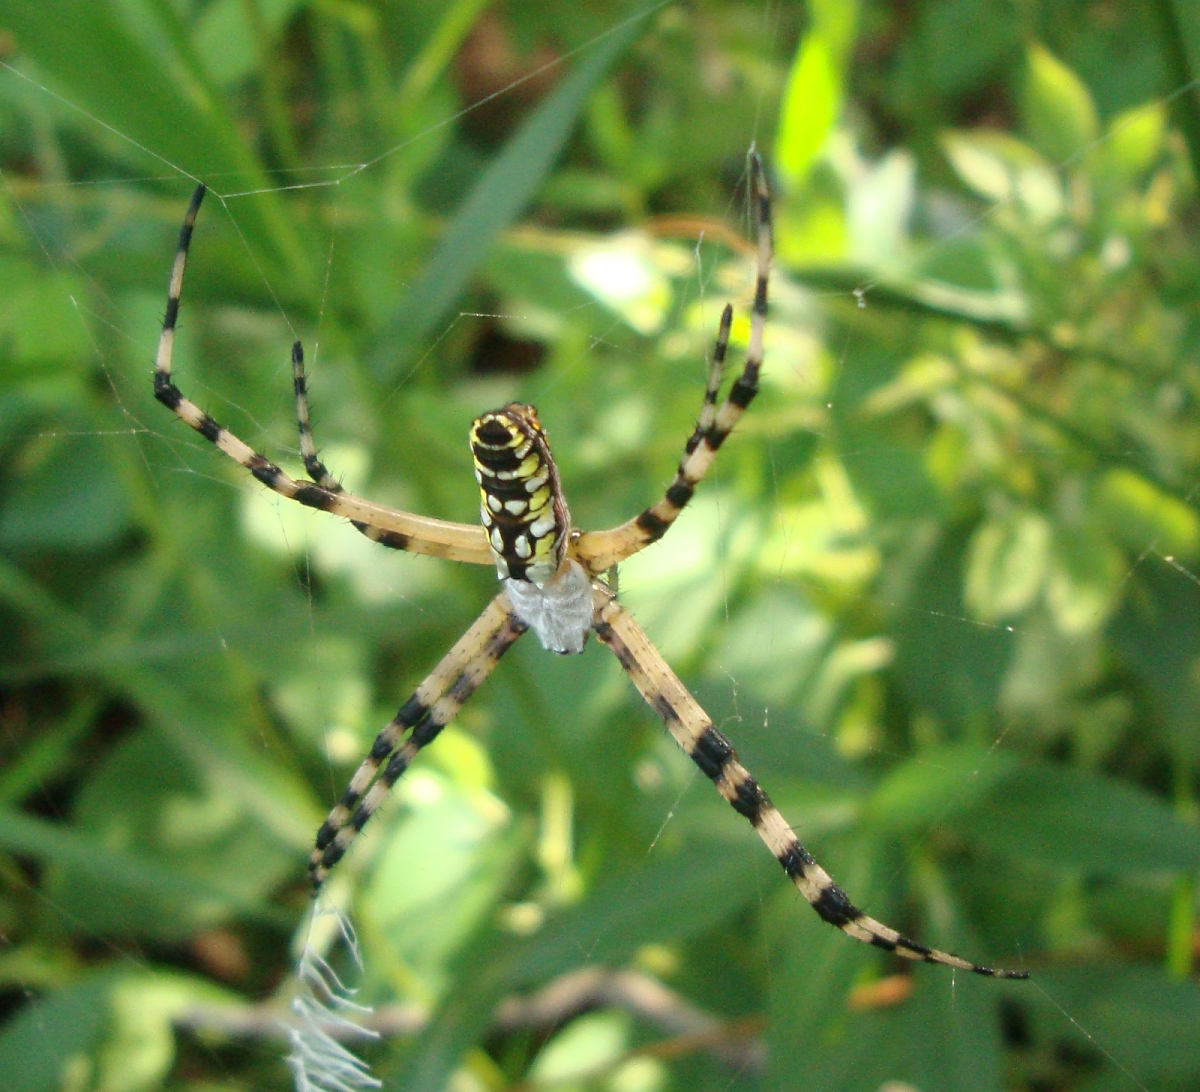 Black-and-Yellow Orb Weaver